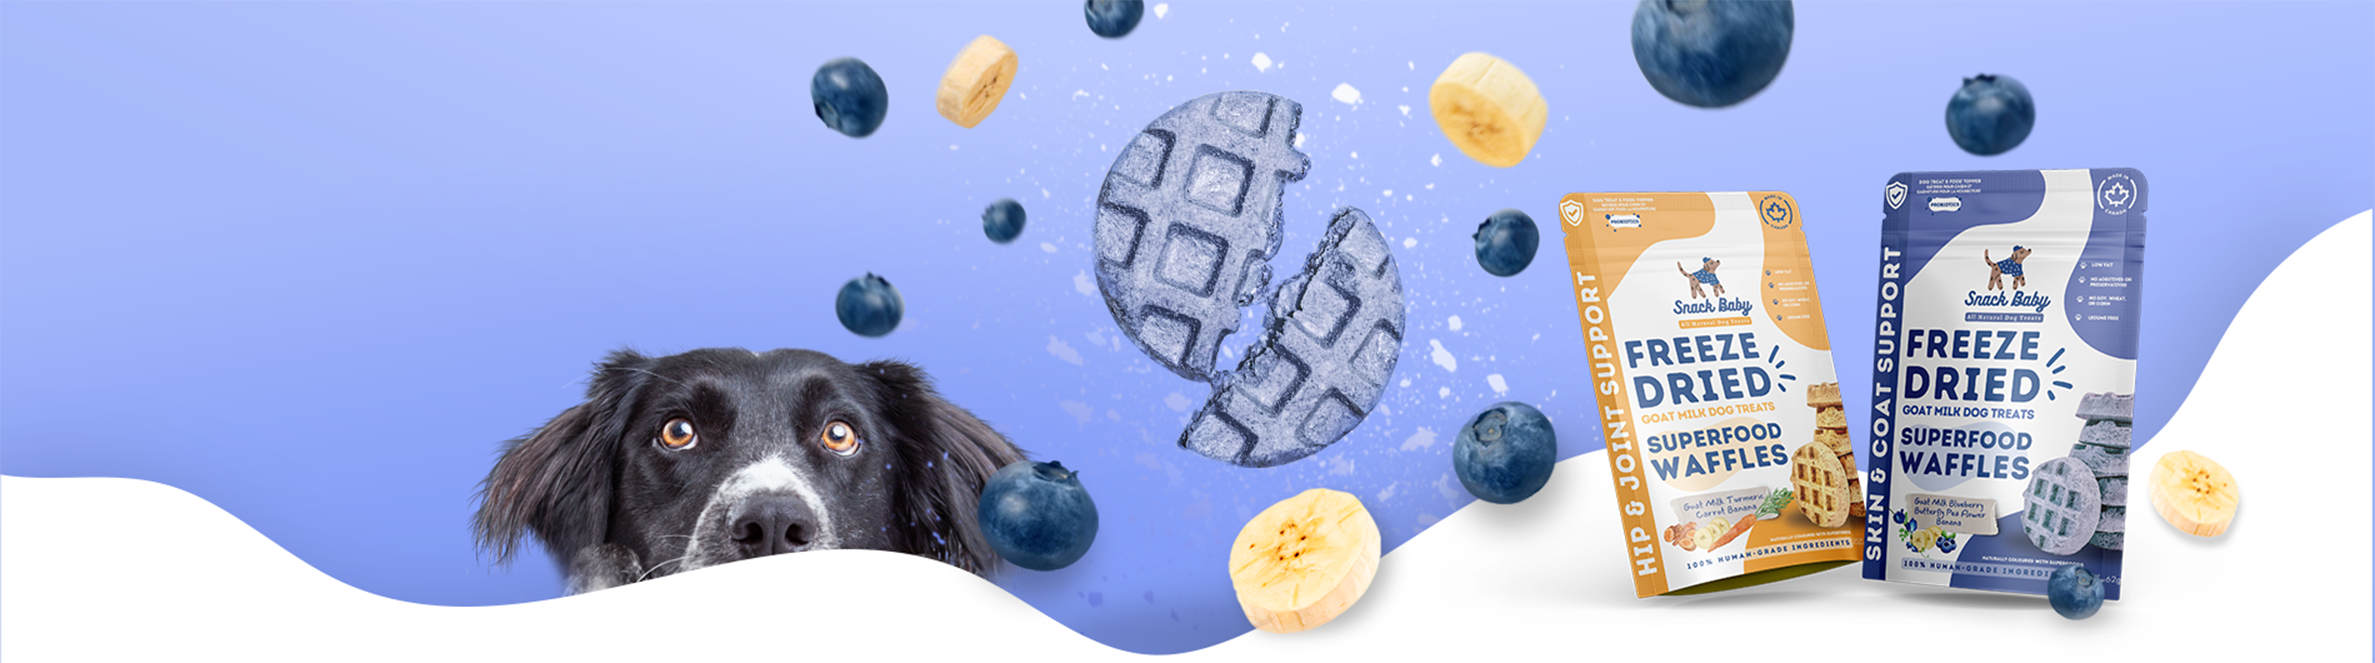 A black and white dog stares at Snack Baby's Blueberry Superfood Waffle - an all natural freeze dried dog treat